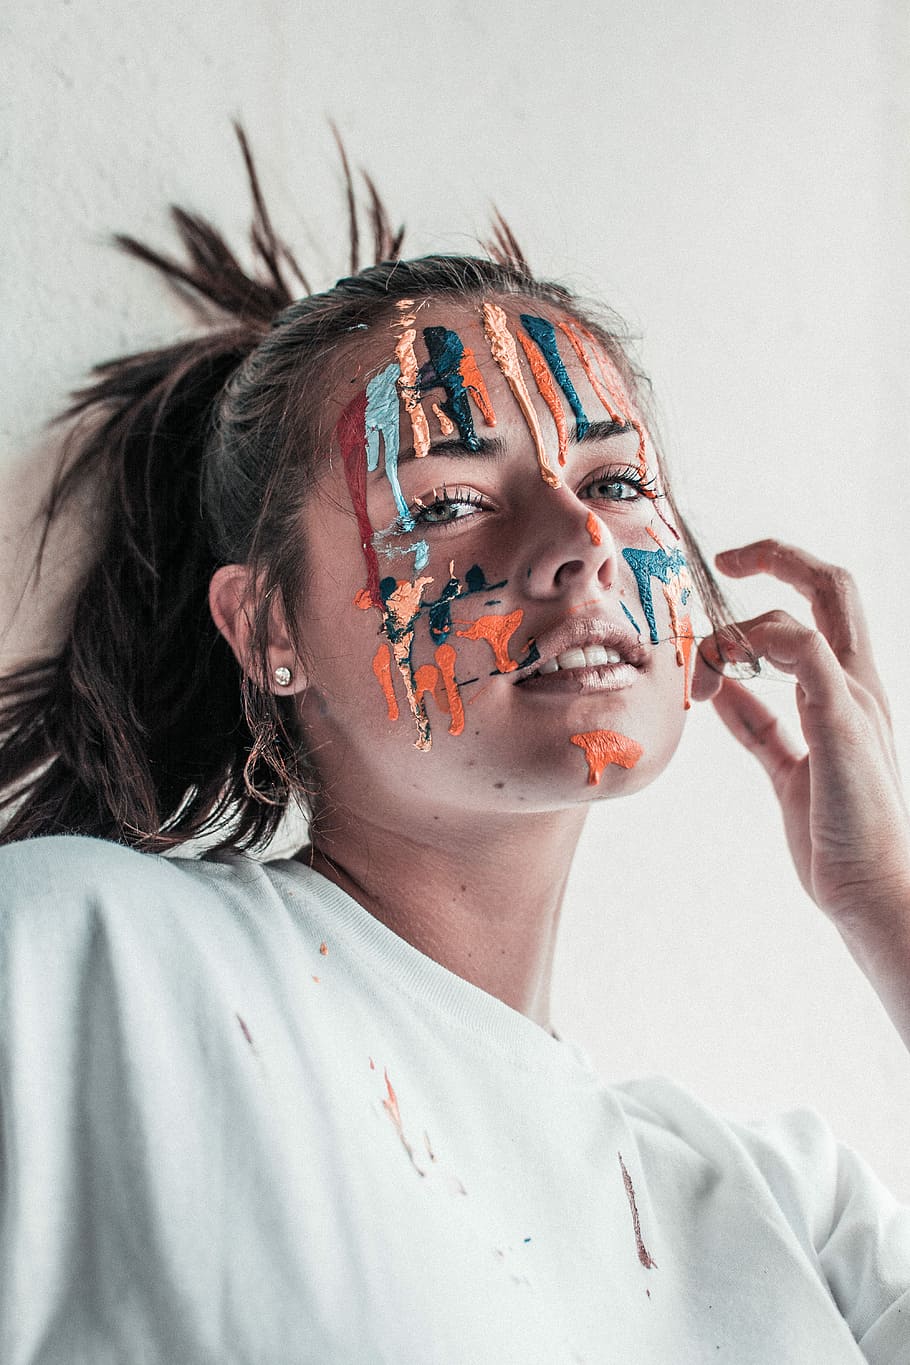 Hd Wallpaper Woman Leaning On Wall With Paint On Face Woman Face